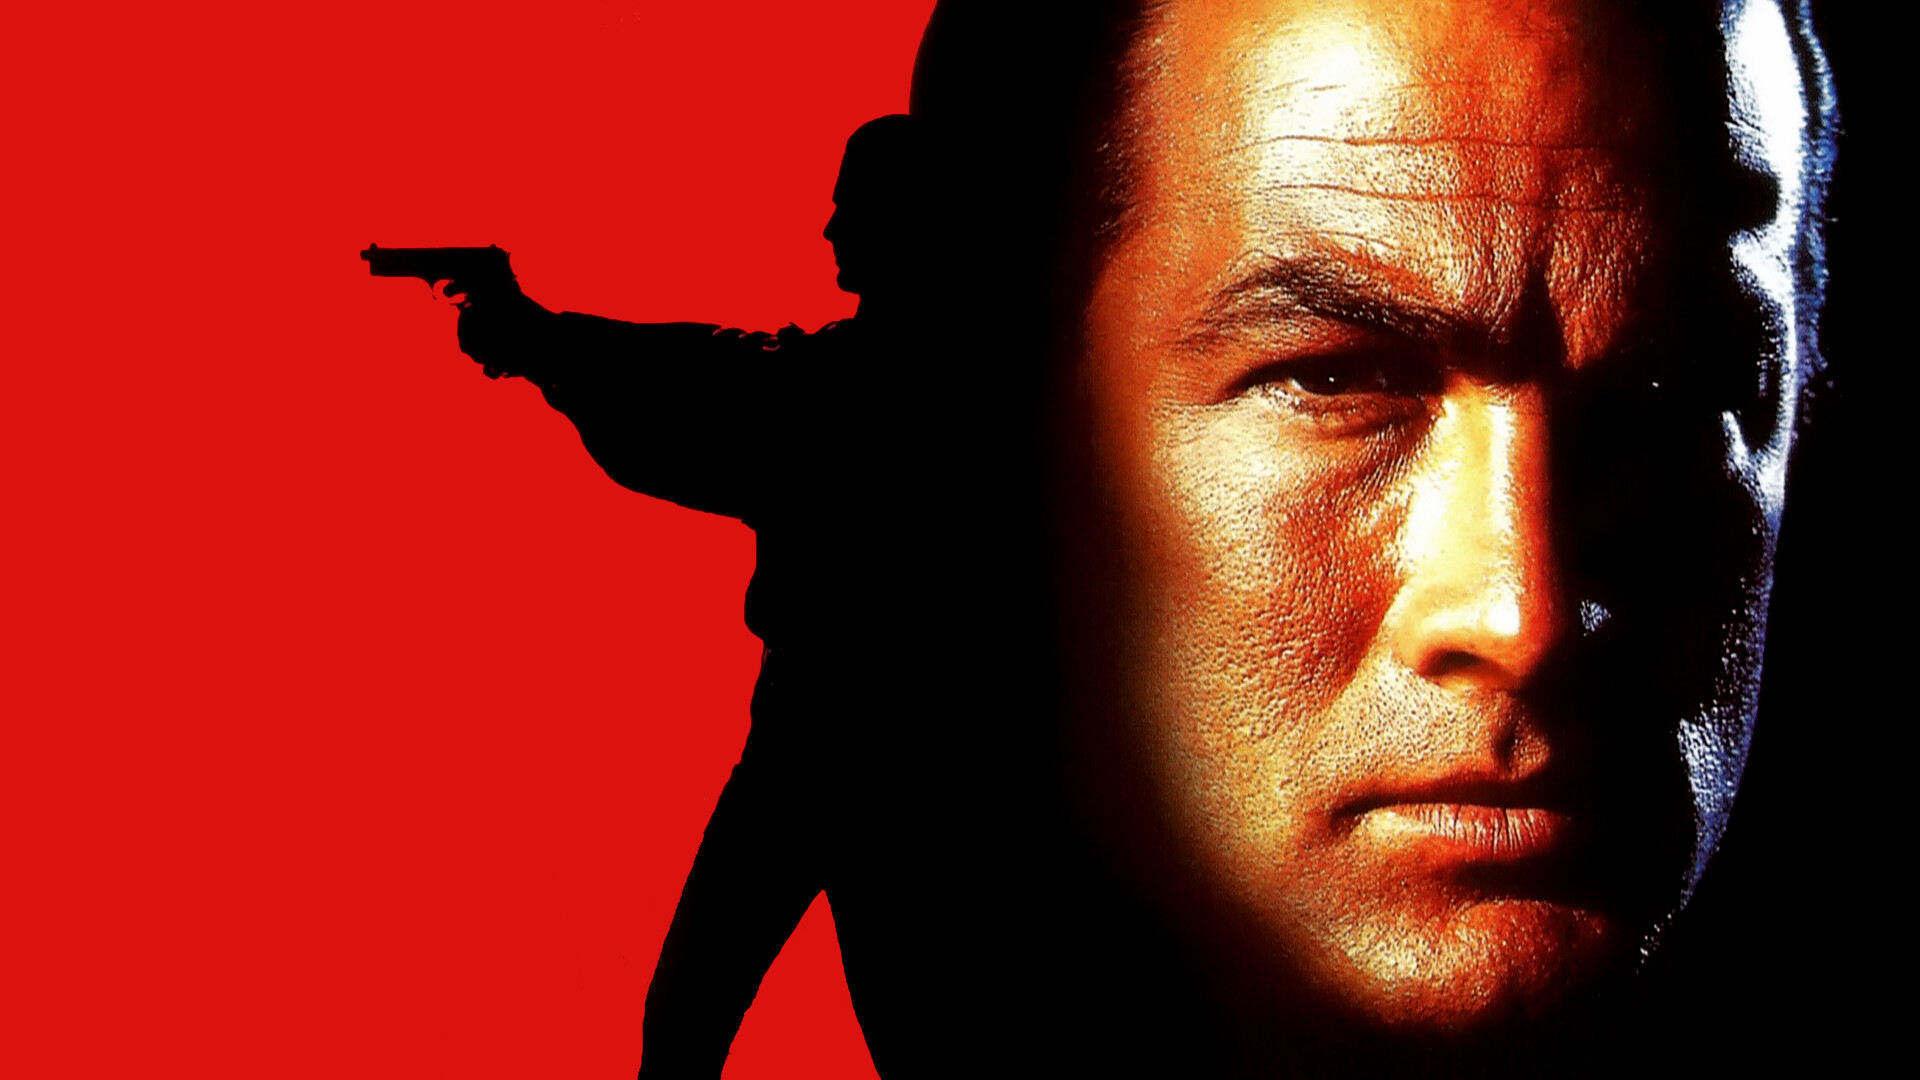 Steven Seagal: Marked for Death, An American action film directed by Dwight H. Little, John Hatcher, A former DEA troubleshooter. 1920x1080 Full HD Background.